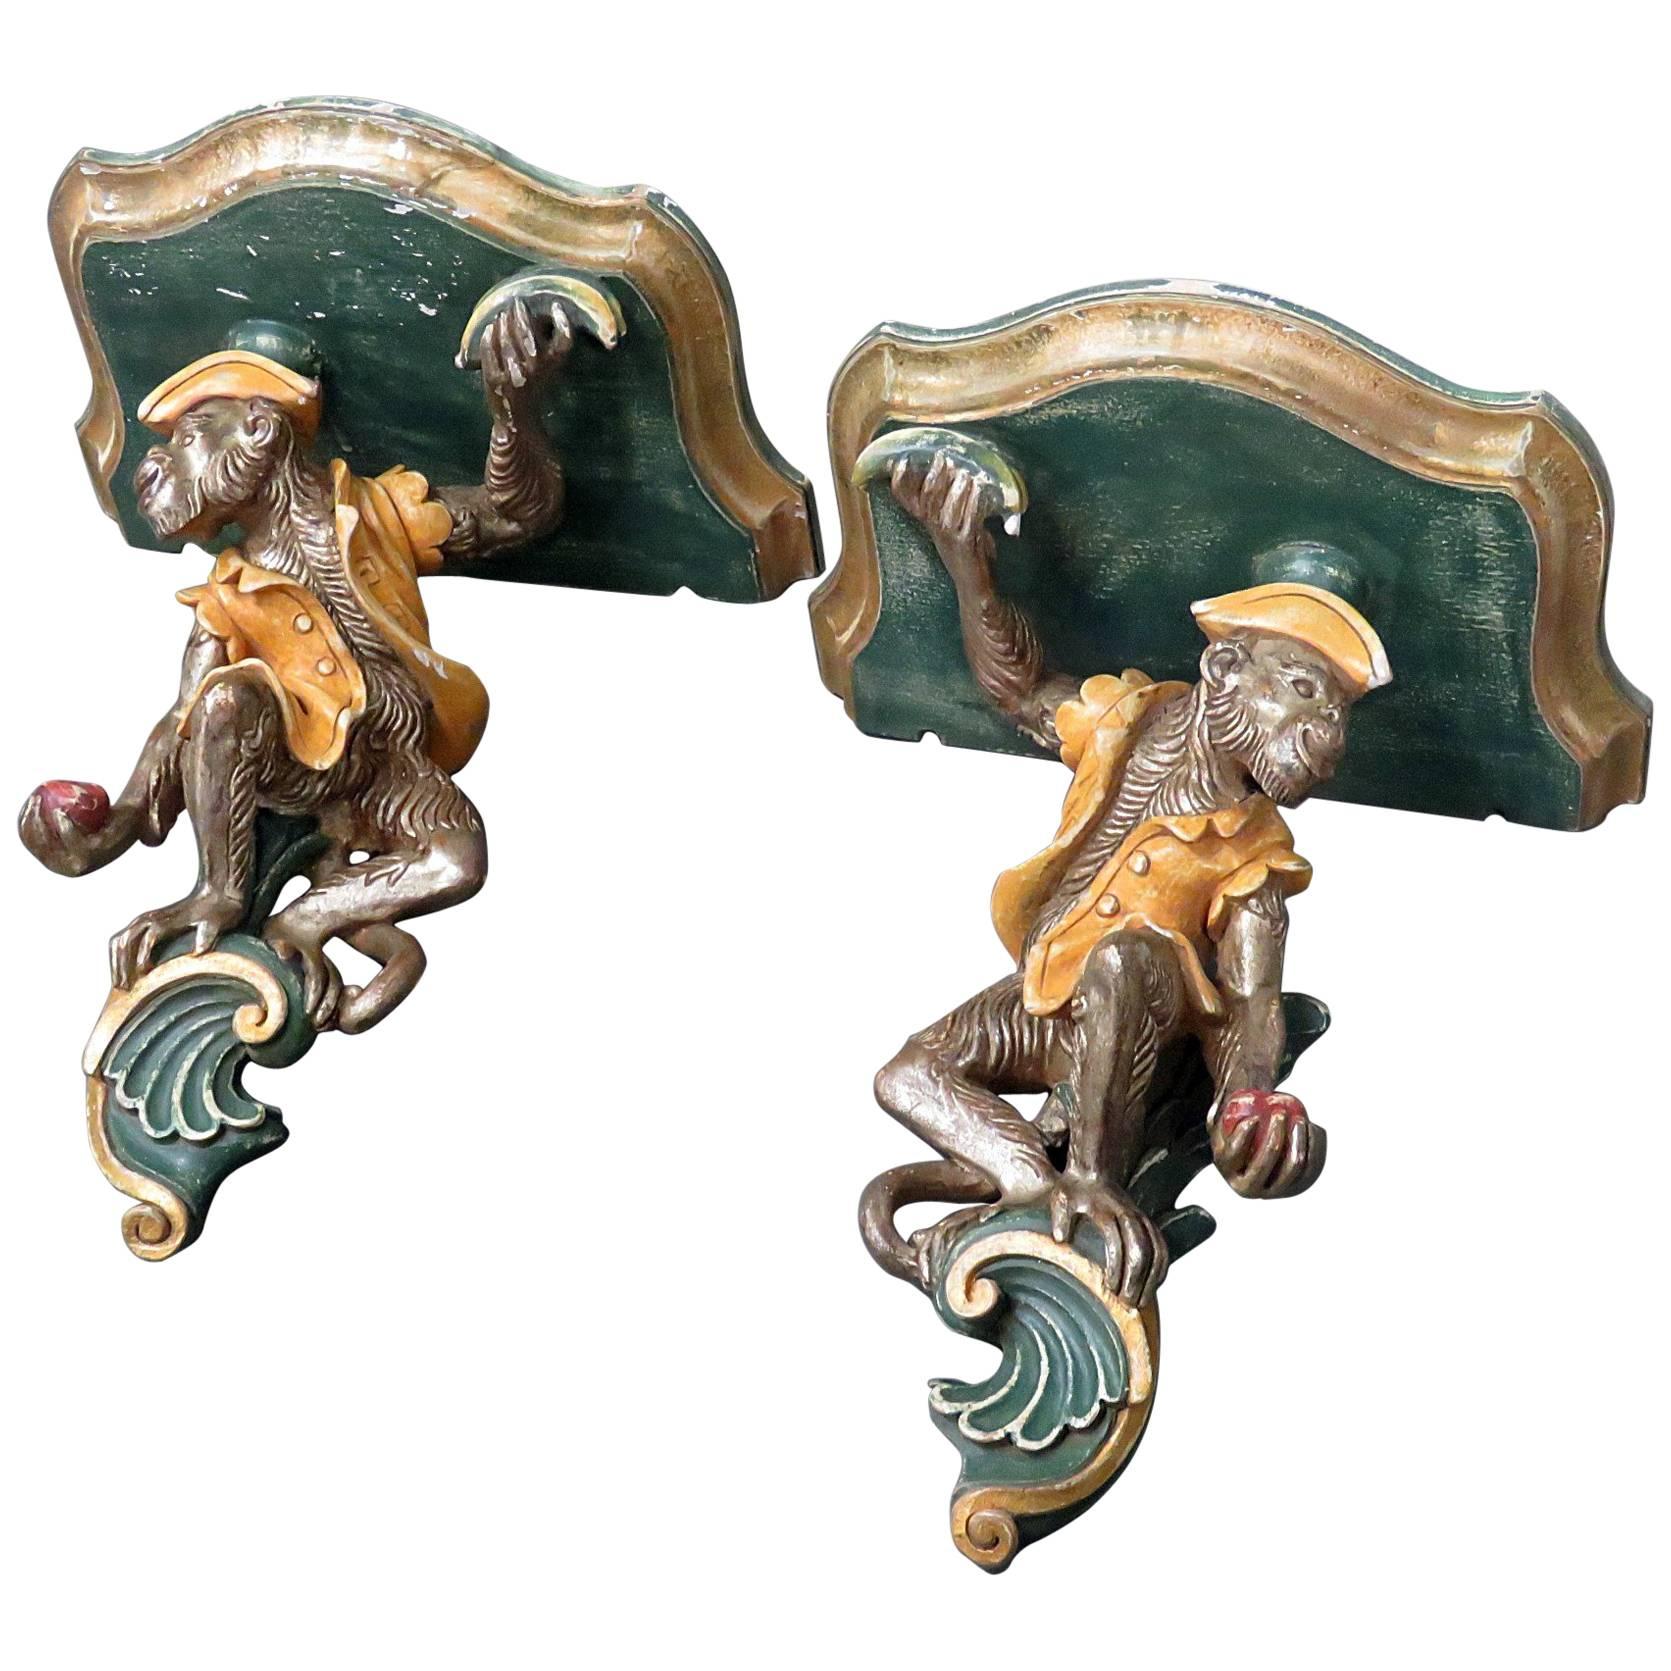 Pair of Carved Italian Chimpanzee Wall Sculptures